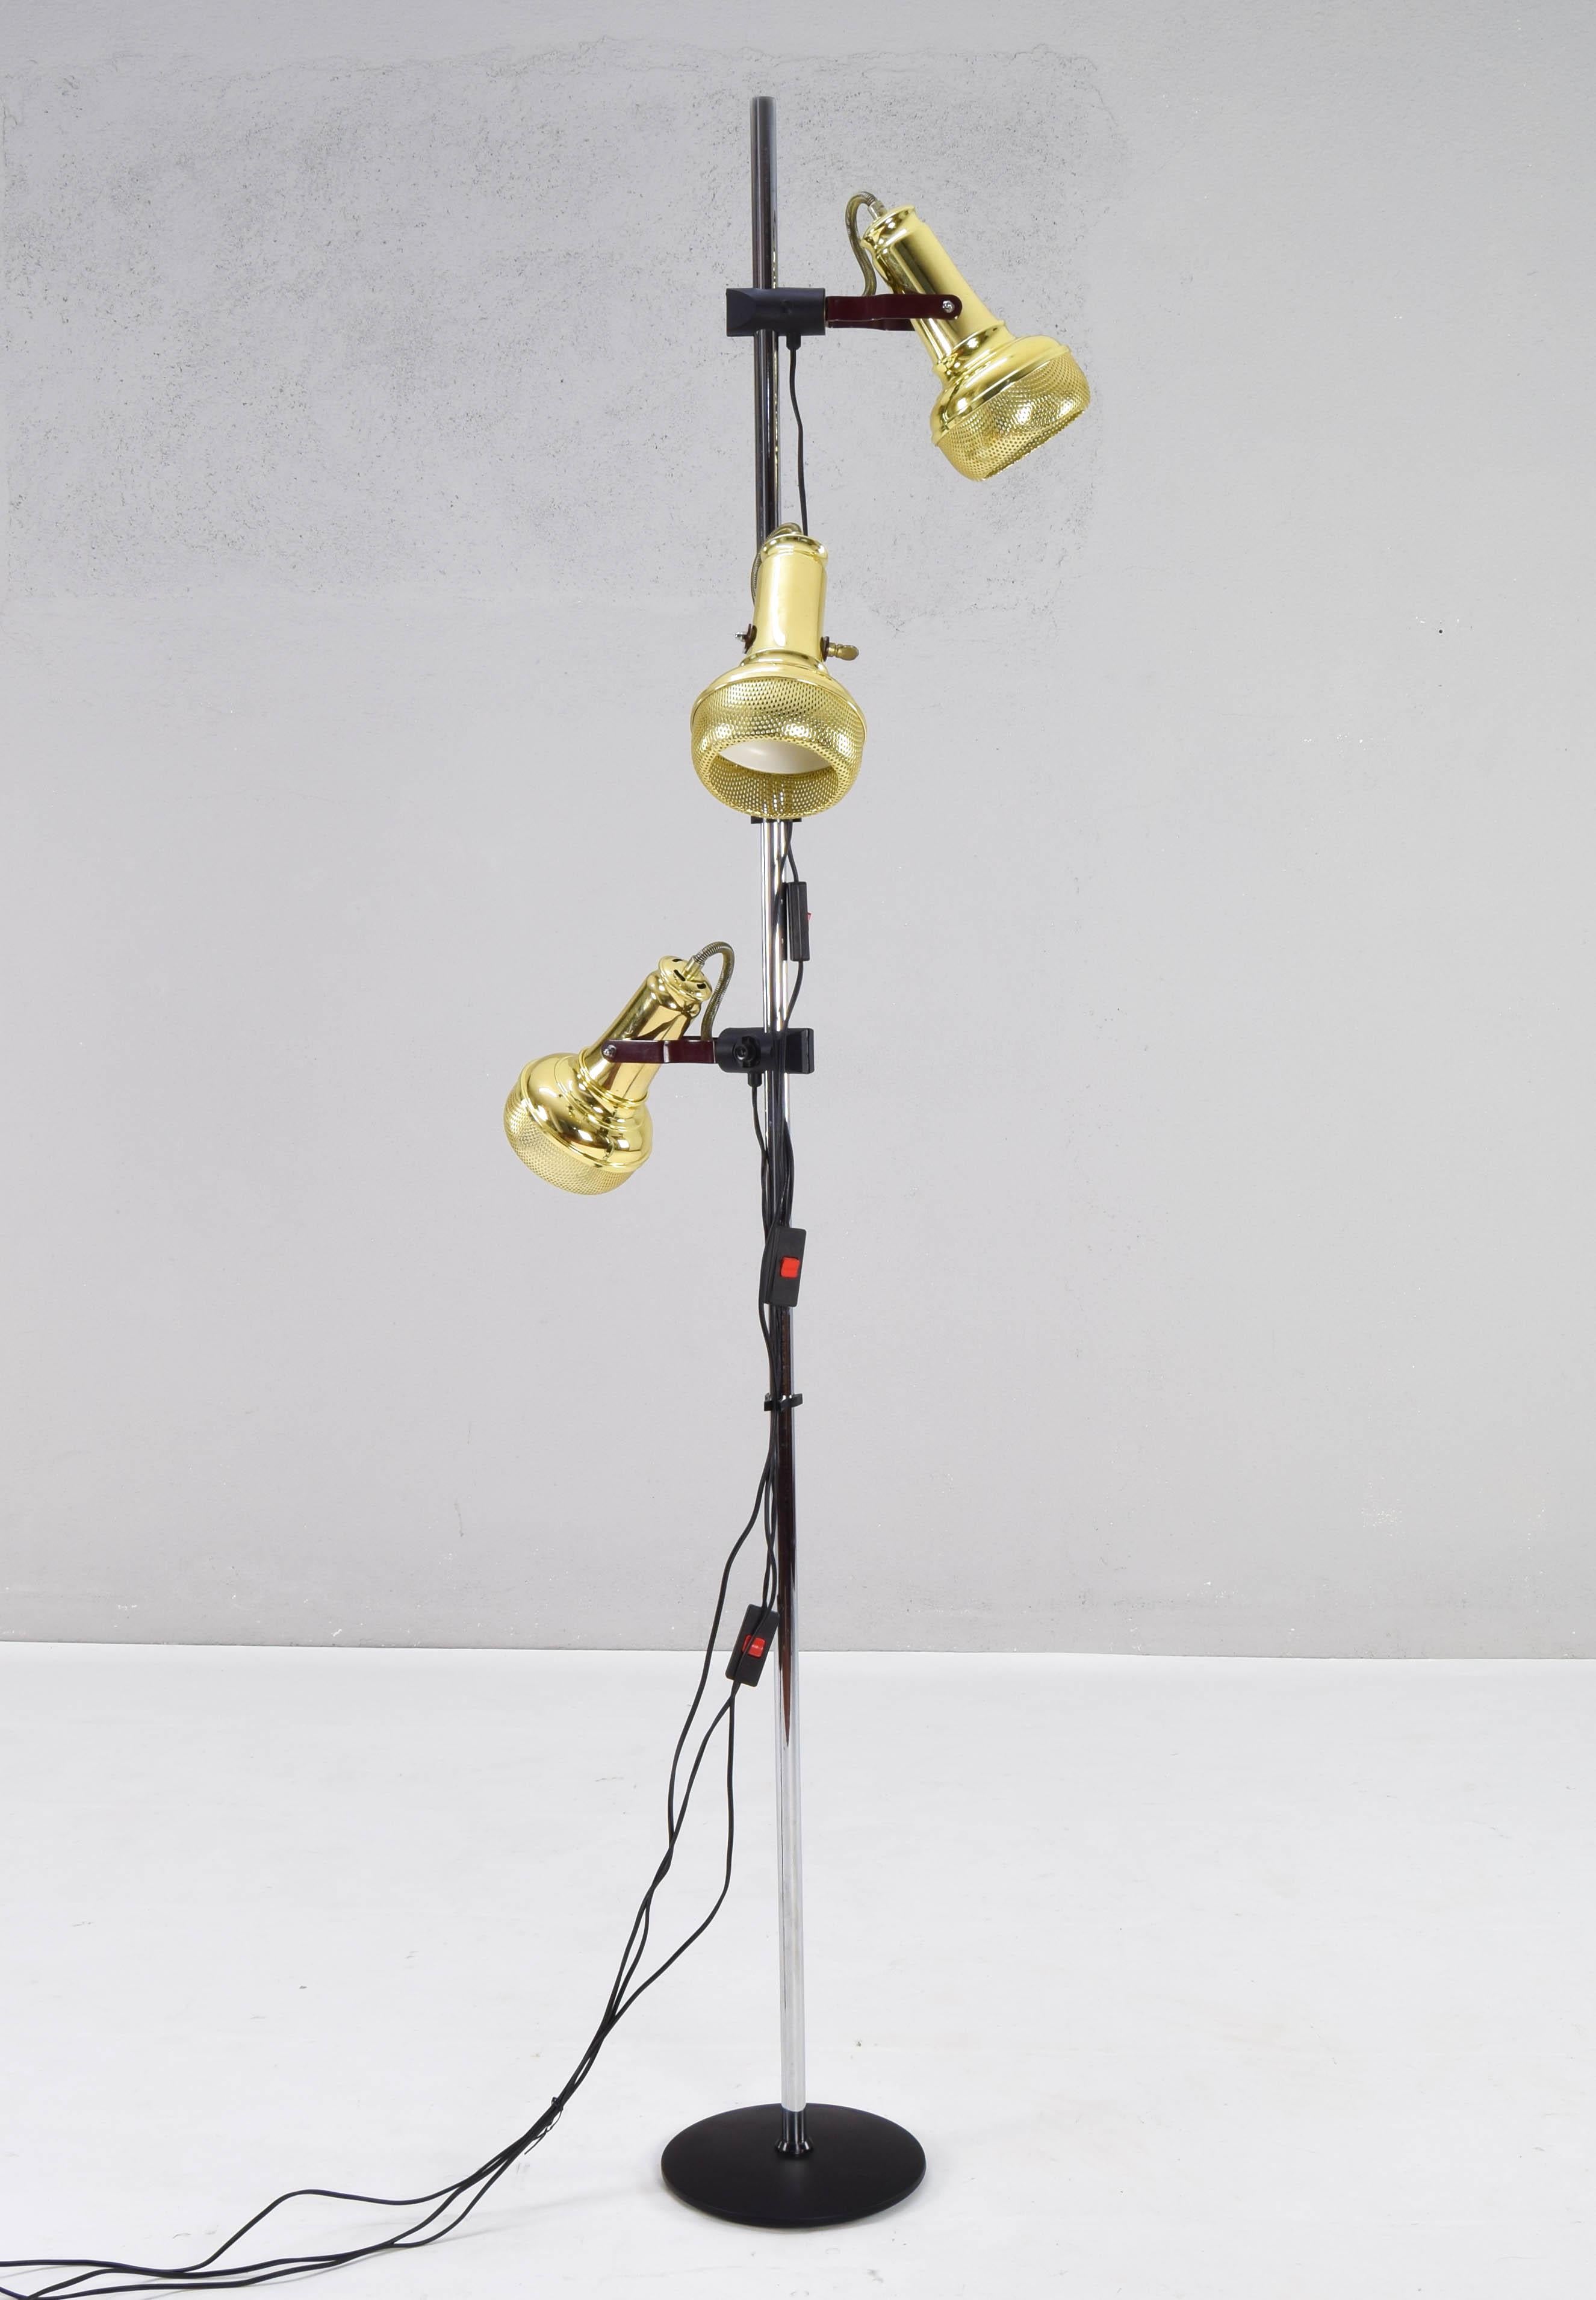 Floor lamp with three independent and adjustable lighting sources from the prestigious Spanish brand FASE.
The spotlights of this curious and fun lamp are shaped like microphones and are finished in golden brass.

Although it shows normal signs